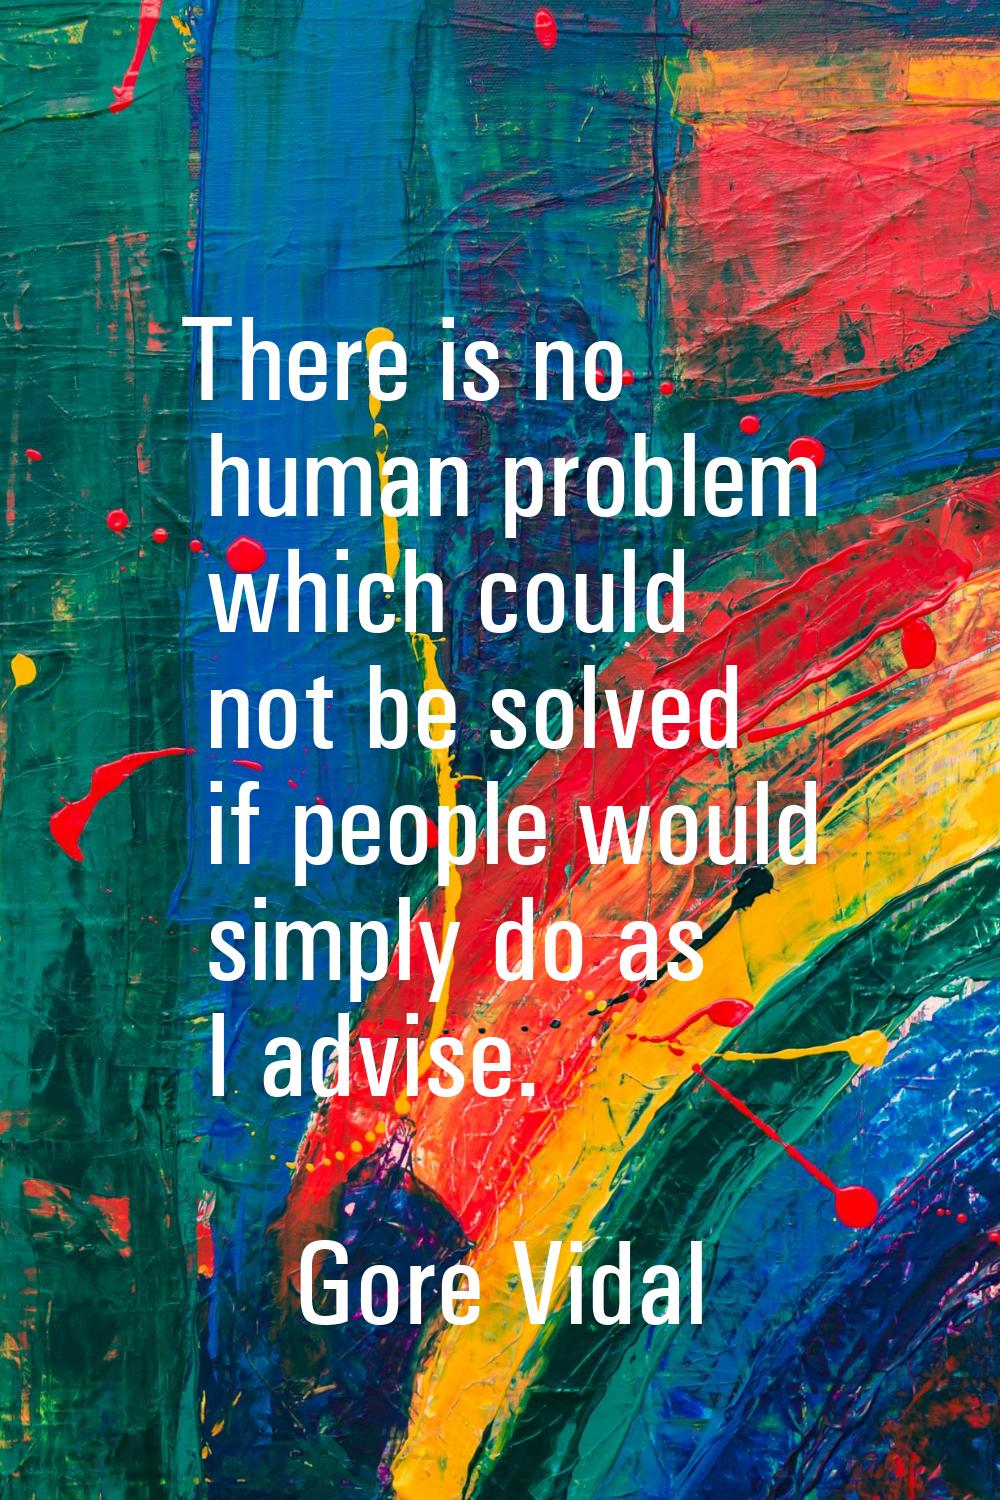 There is no human problem which could not be solved if people would simply do as I advise.